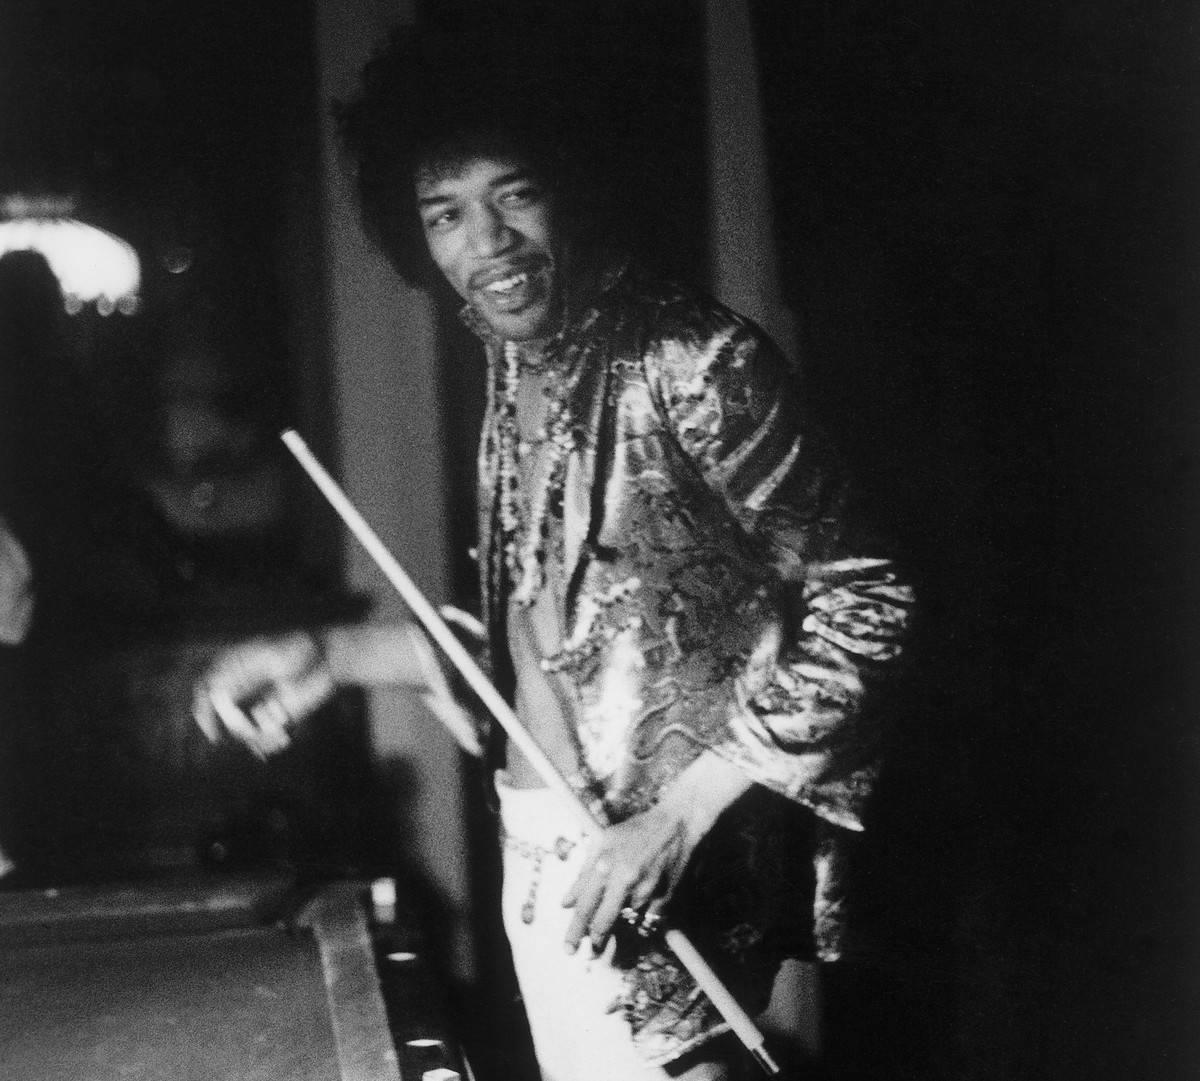 <p>Jimi Hendrix is one of the most celebrated guitarists of the 20th century. </p> <p>Just because he is a high-profile star doesn't mean Hendrix didn't like his downtime. Here, we see the guitarist smiling while playing a game of pool at a friend's house back in 1967. </p>